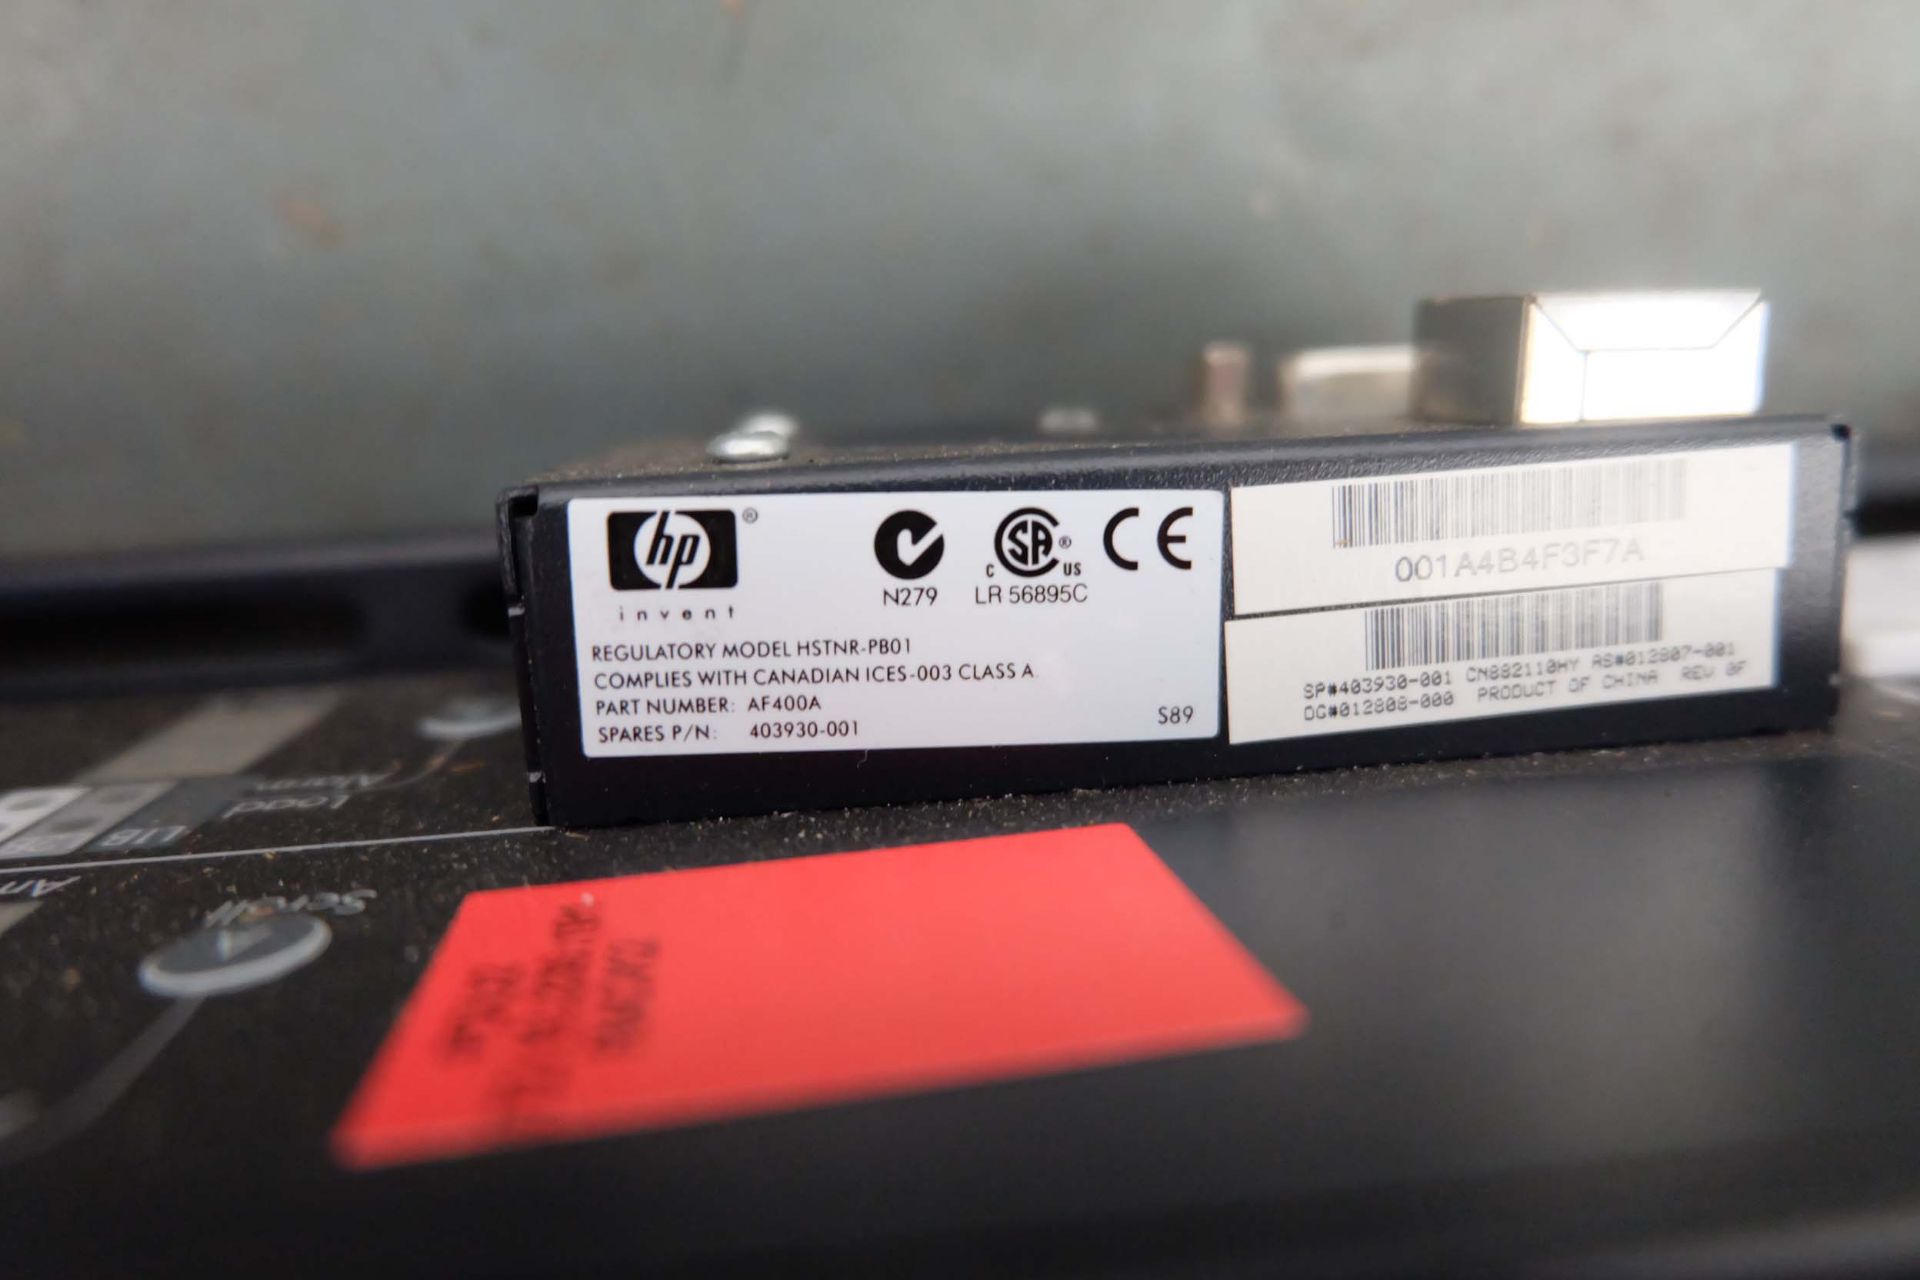 HP Power Monitoring PDU-S2132. Input: 1 Phase (2W - + END) 32 Amp Max. Output: 72 x 10 Amp & 6 x 16 - Image 5 of 9